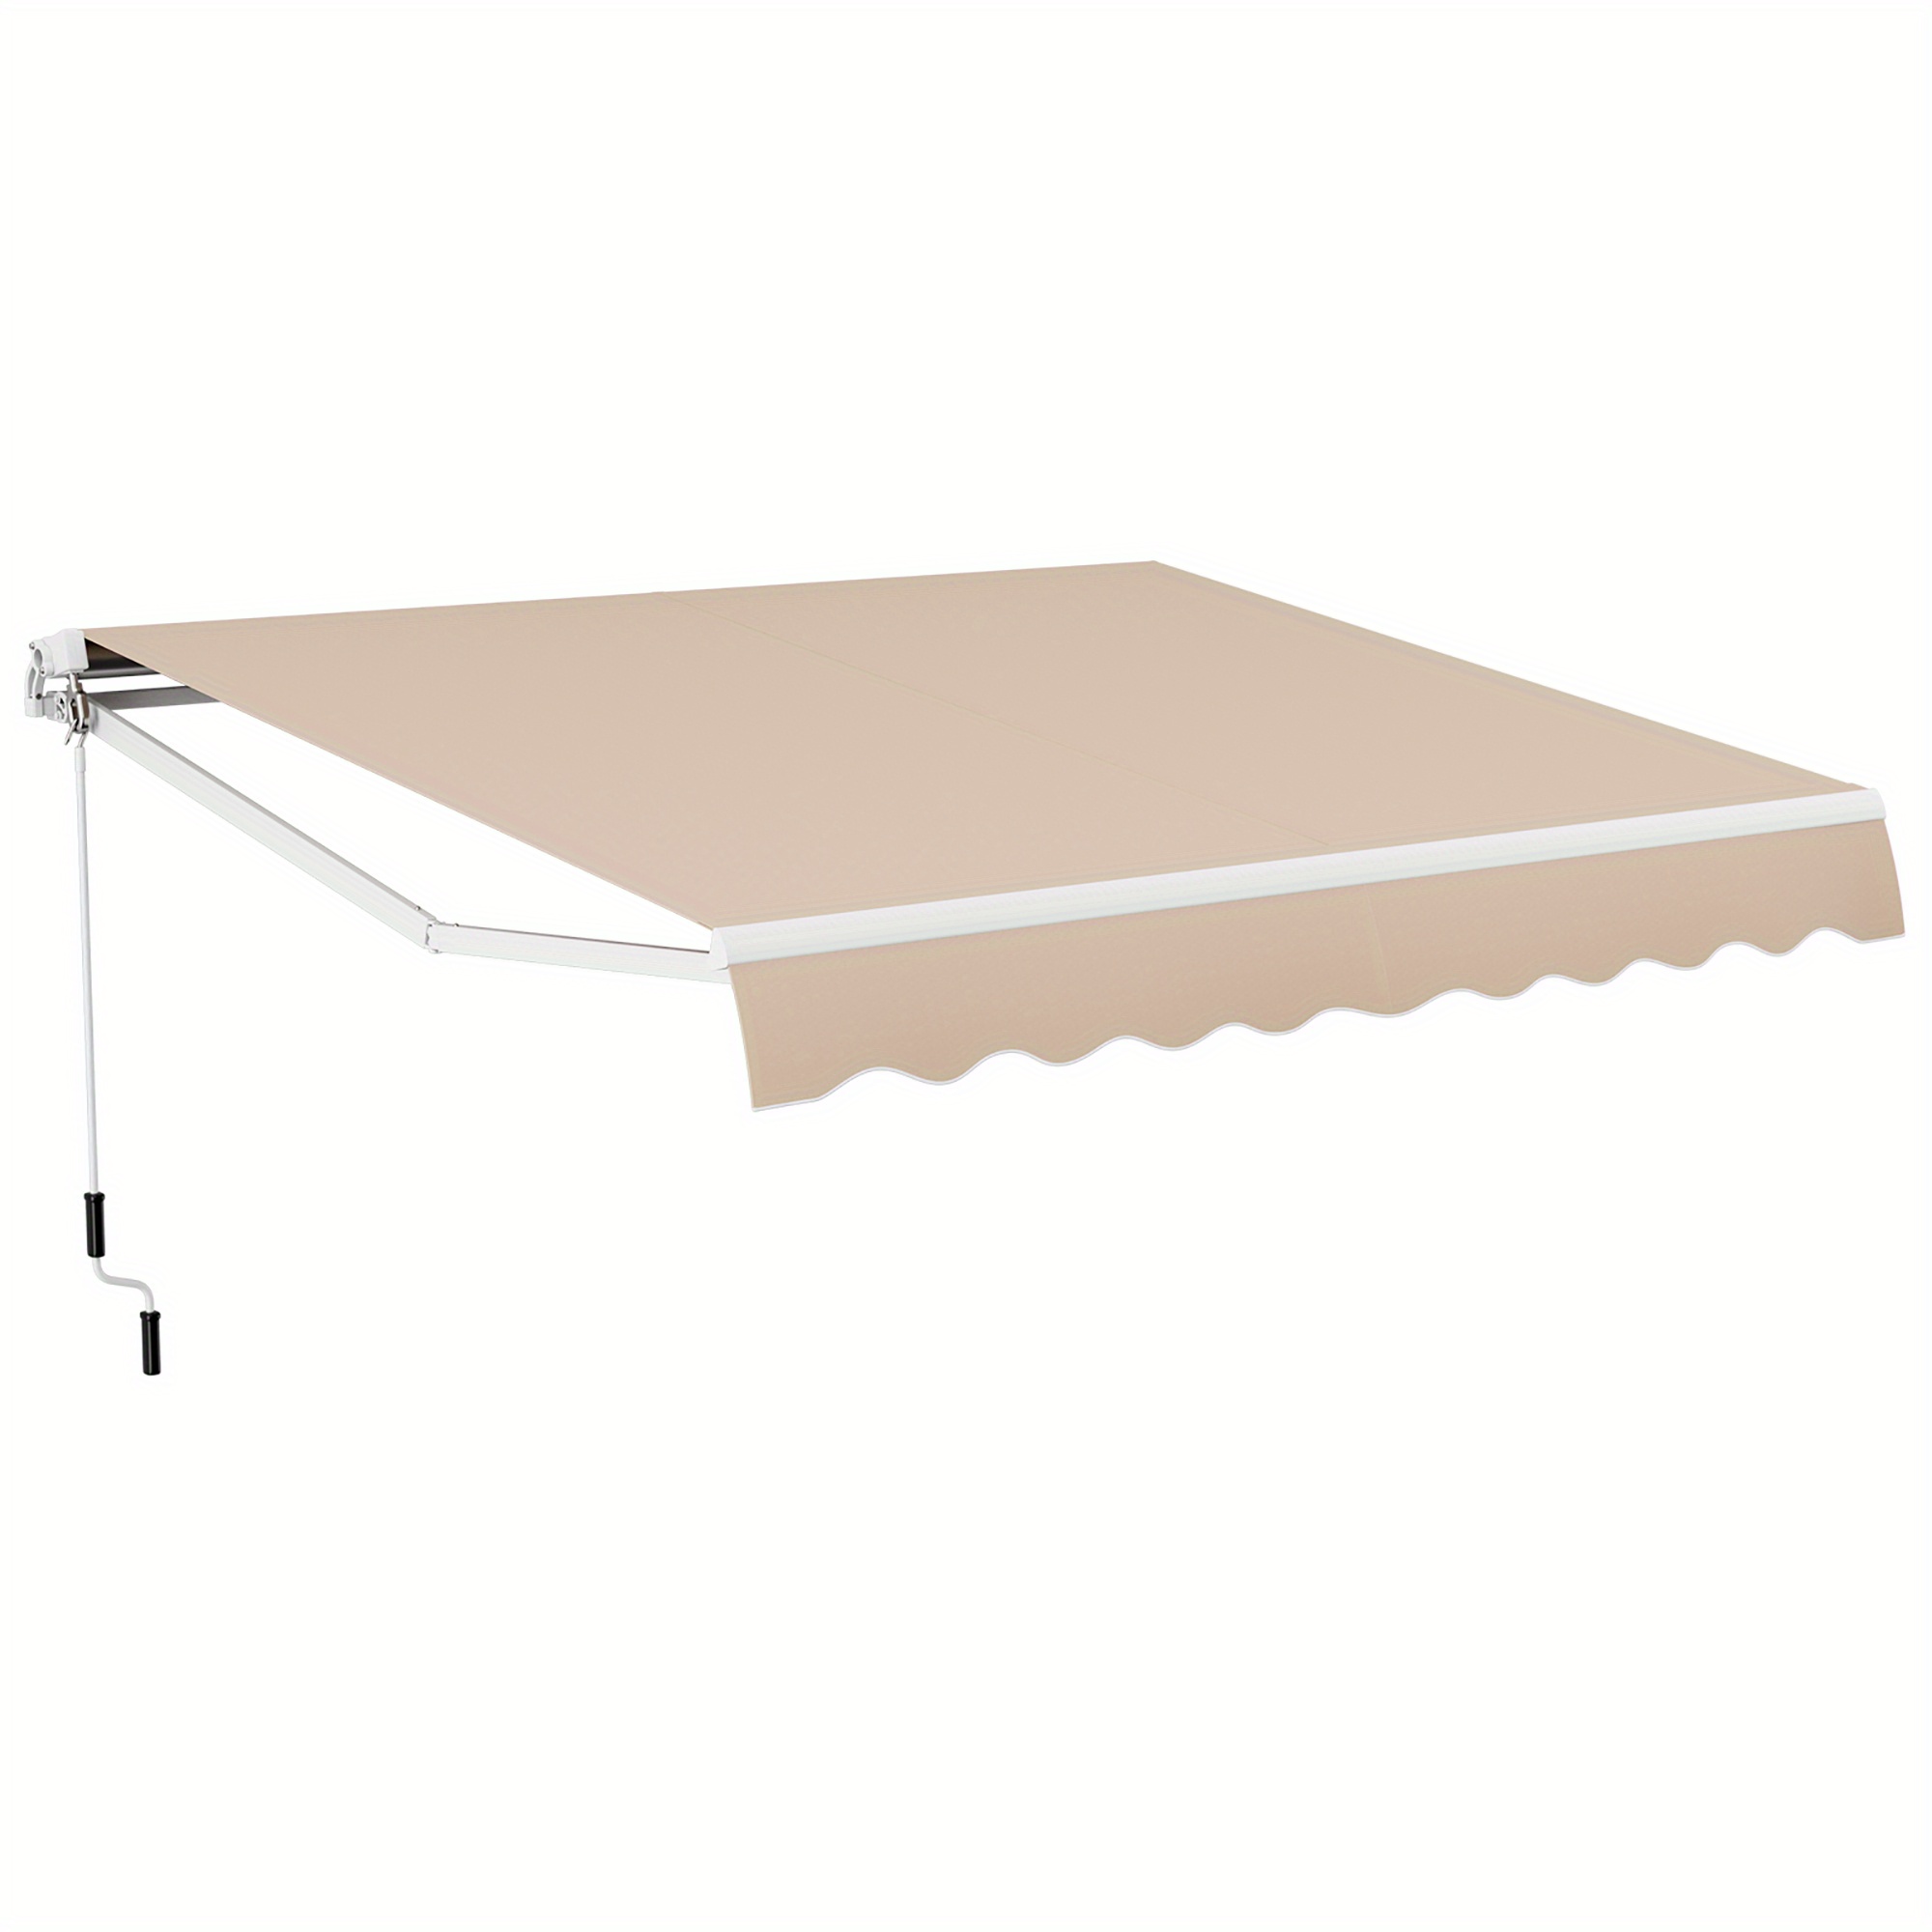 

10 X 8.2 Ft Outdoor Patio Retractable Awning Polyester Sunshade Cover W/ Manual Crank Handle Deck Beige